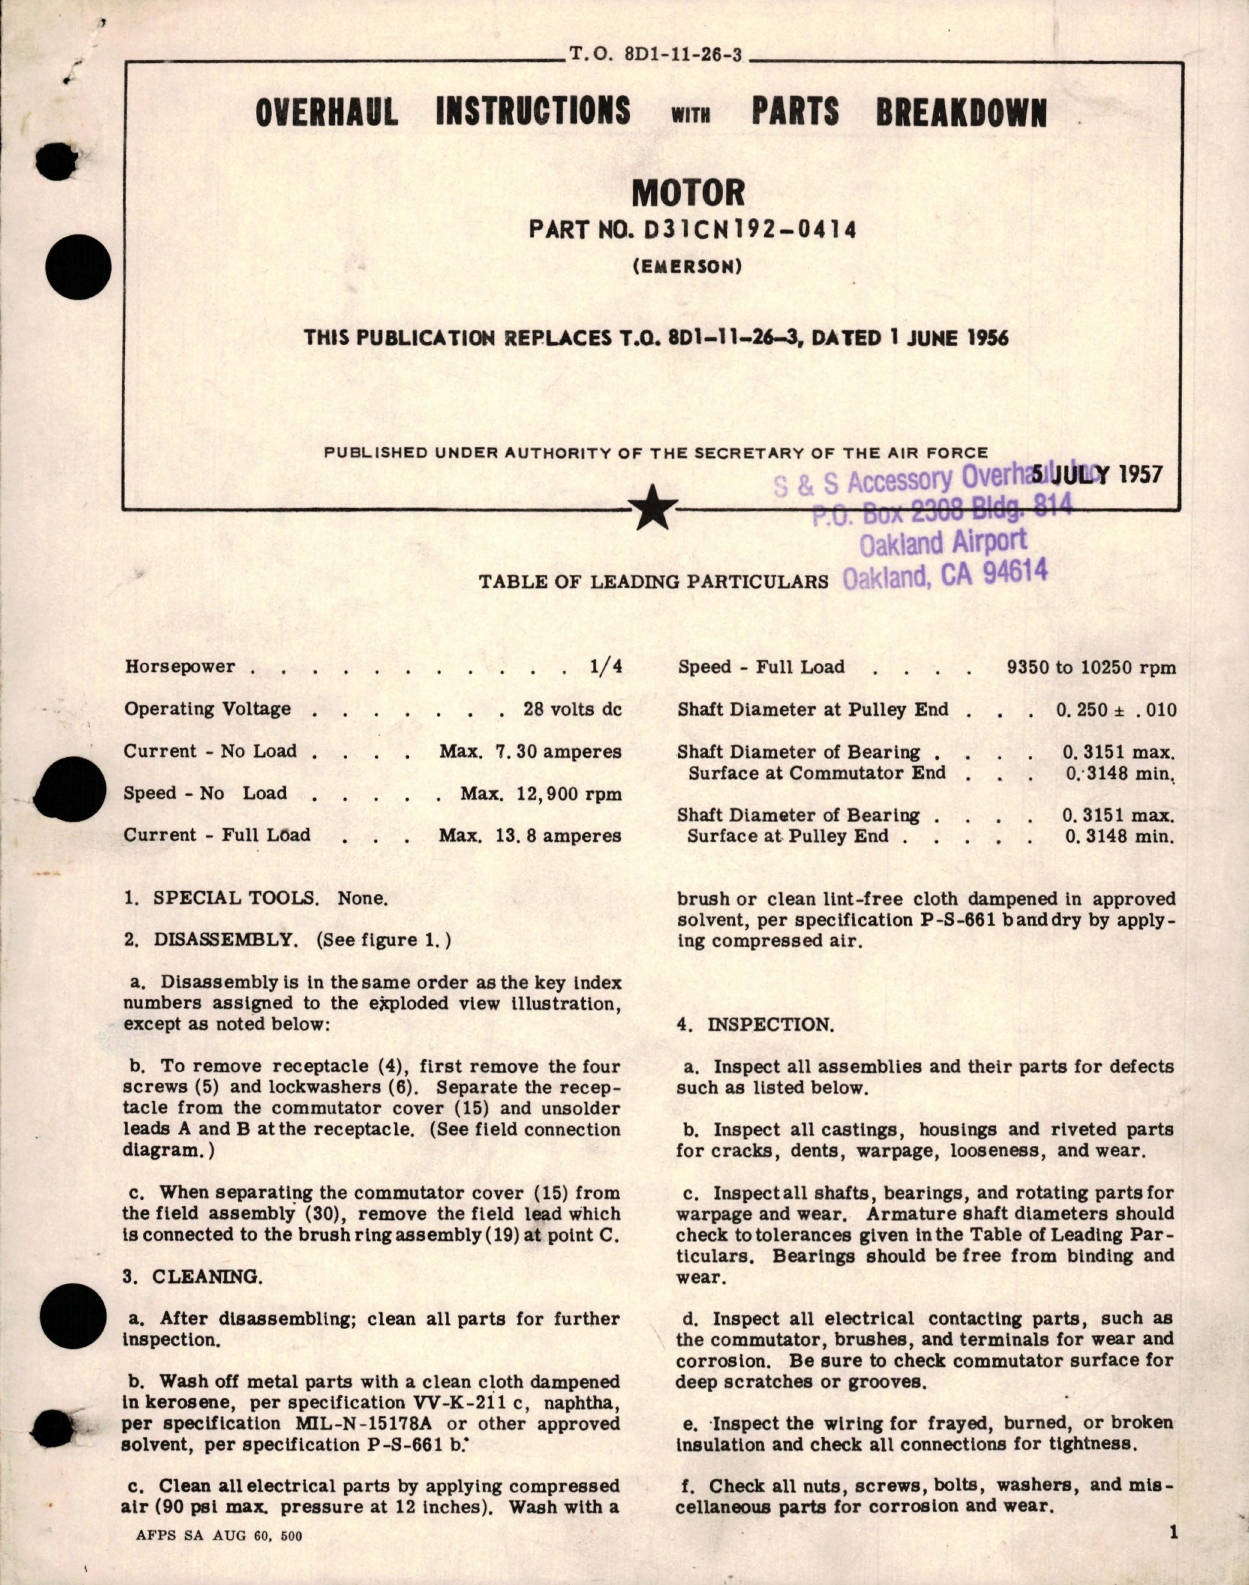 Sample page 1 from AirCorps Library document: Overhaul Instructions with Parts Breakdown for Motor - Part D31CN192-0414 